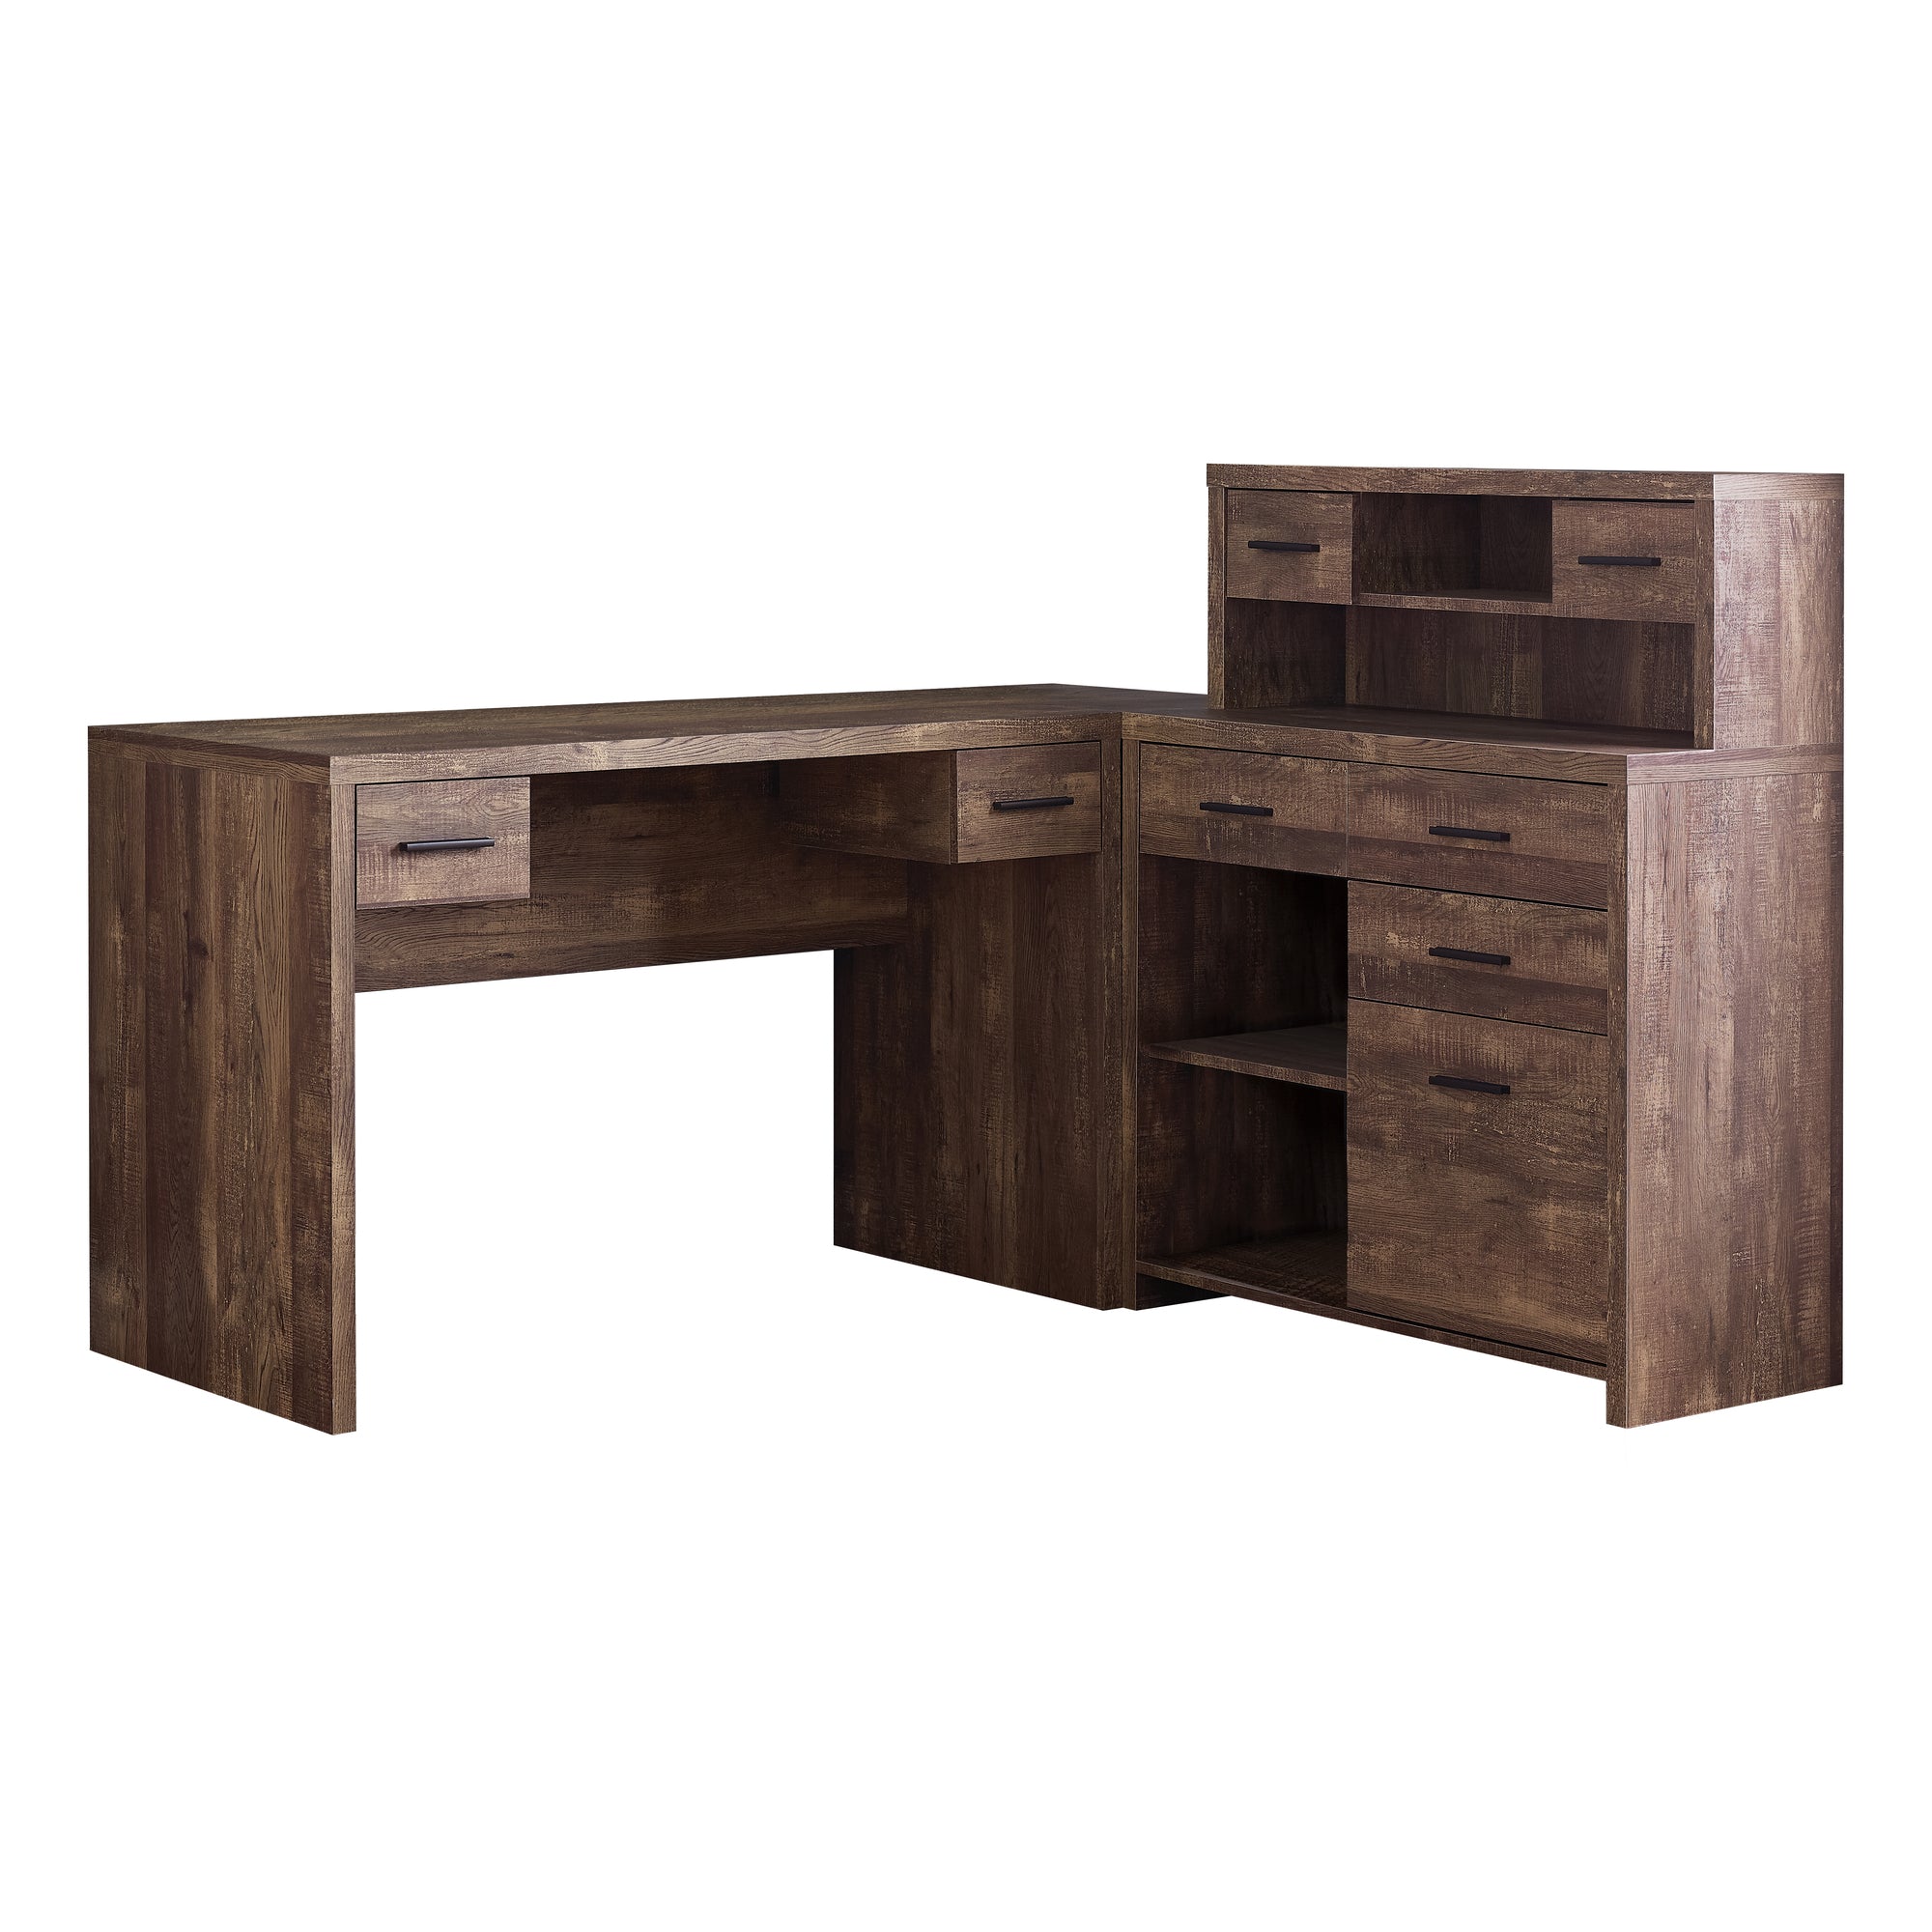 MN-907427    Computer Desk, Home Office, Corner, Left, Right Set-Up, Storage Drawers, L Shape, Laminate, Brown Reclaimed Wood Look, Contemporary, Modern